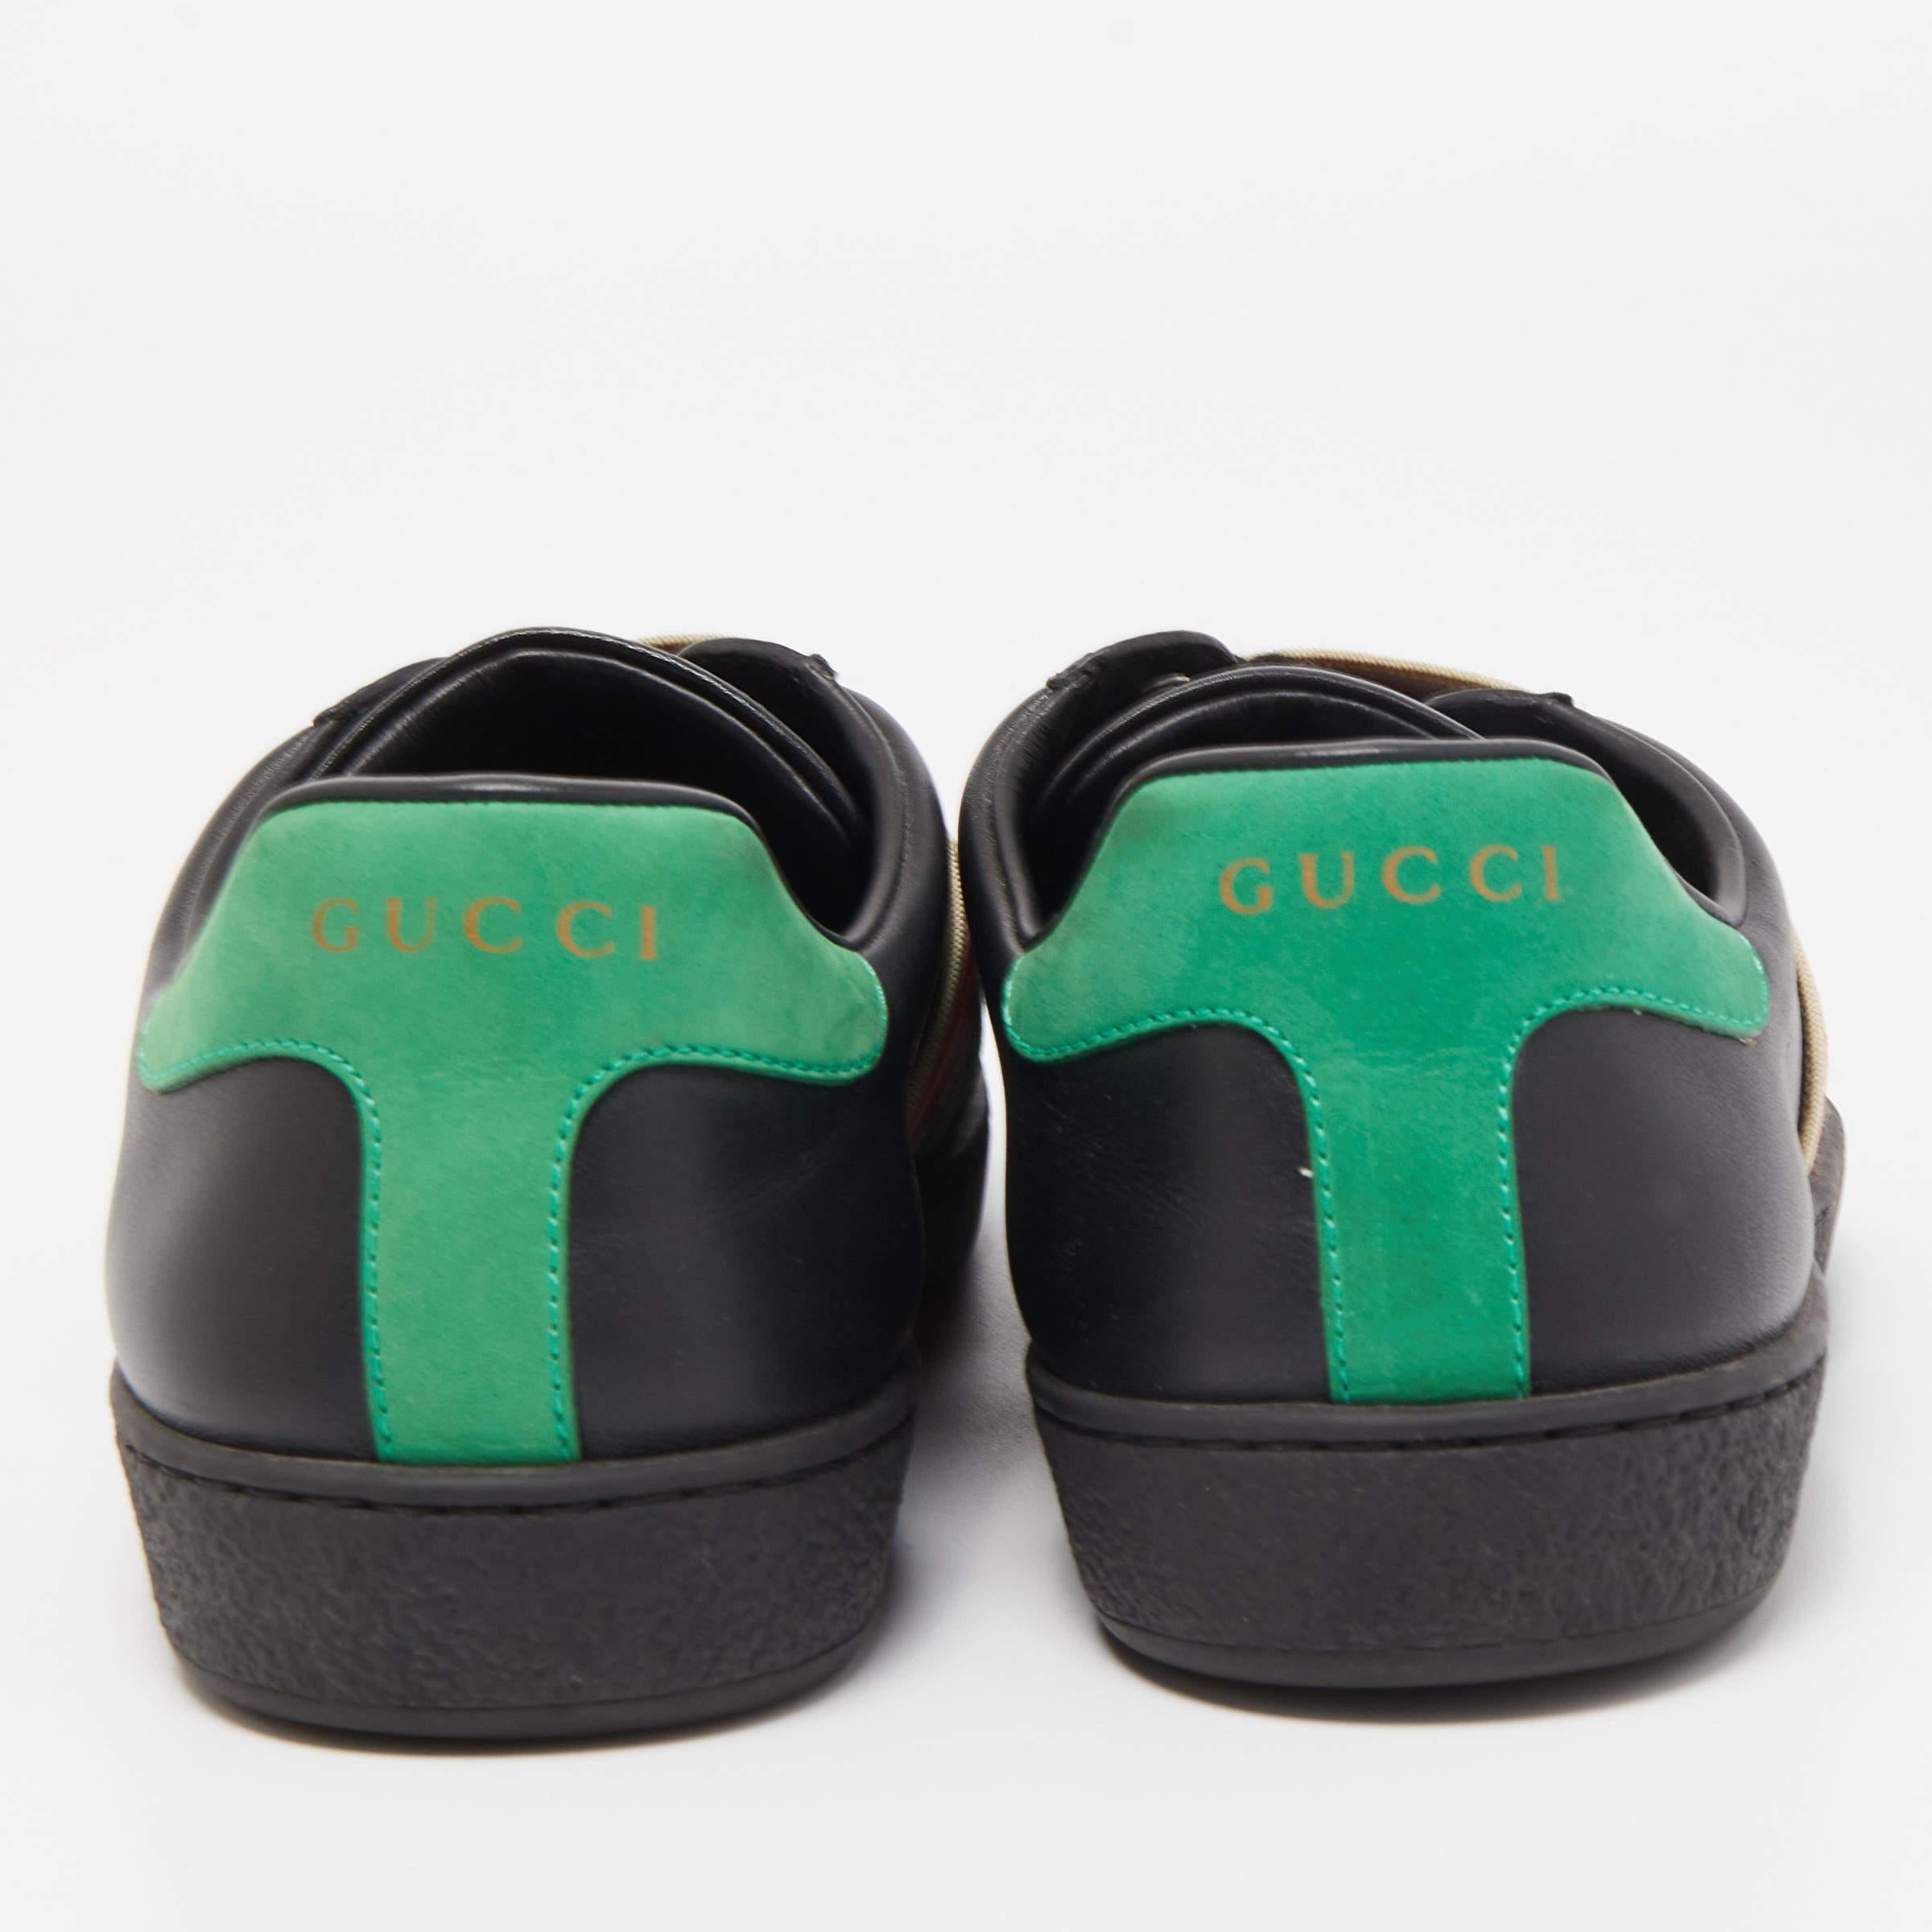 Gucci Black Leather Web Ace Sneakers Size 39.5 For Sale 2